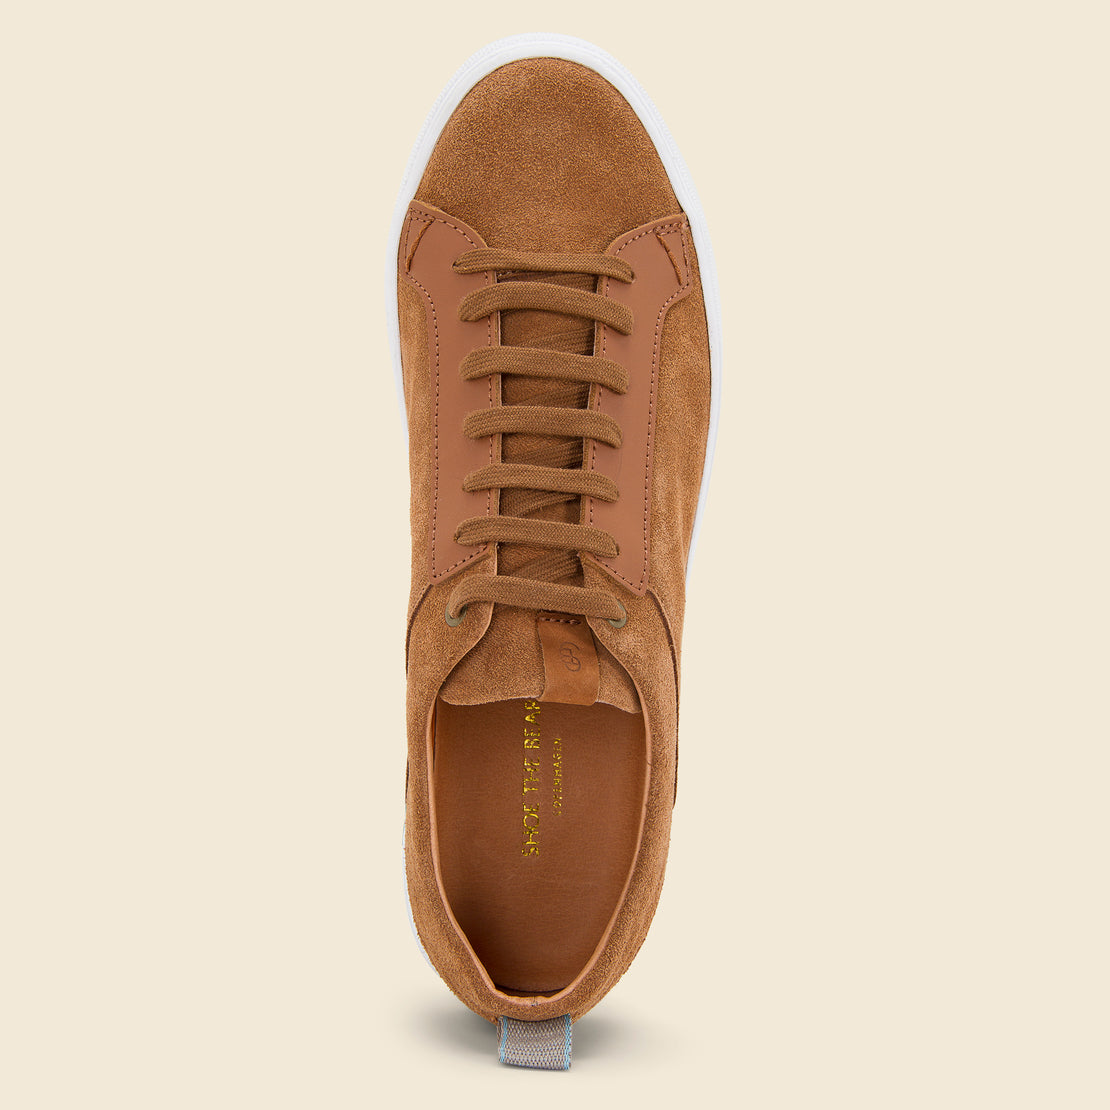 Linden Suede Sneaker - Tan - Shoe the Bear - STAG Provisions - Shoes - Athletic